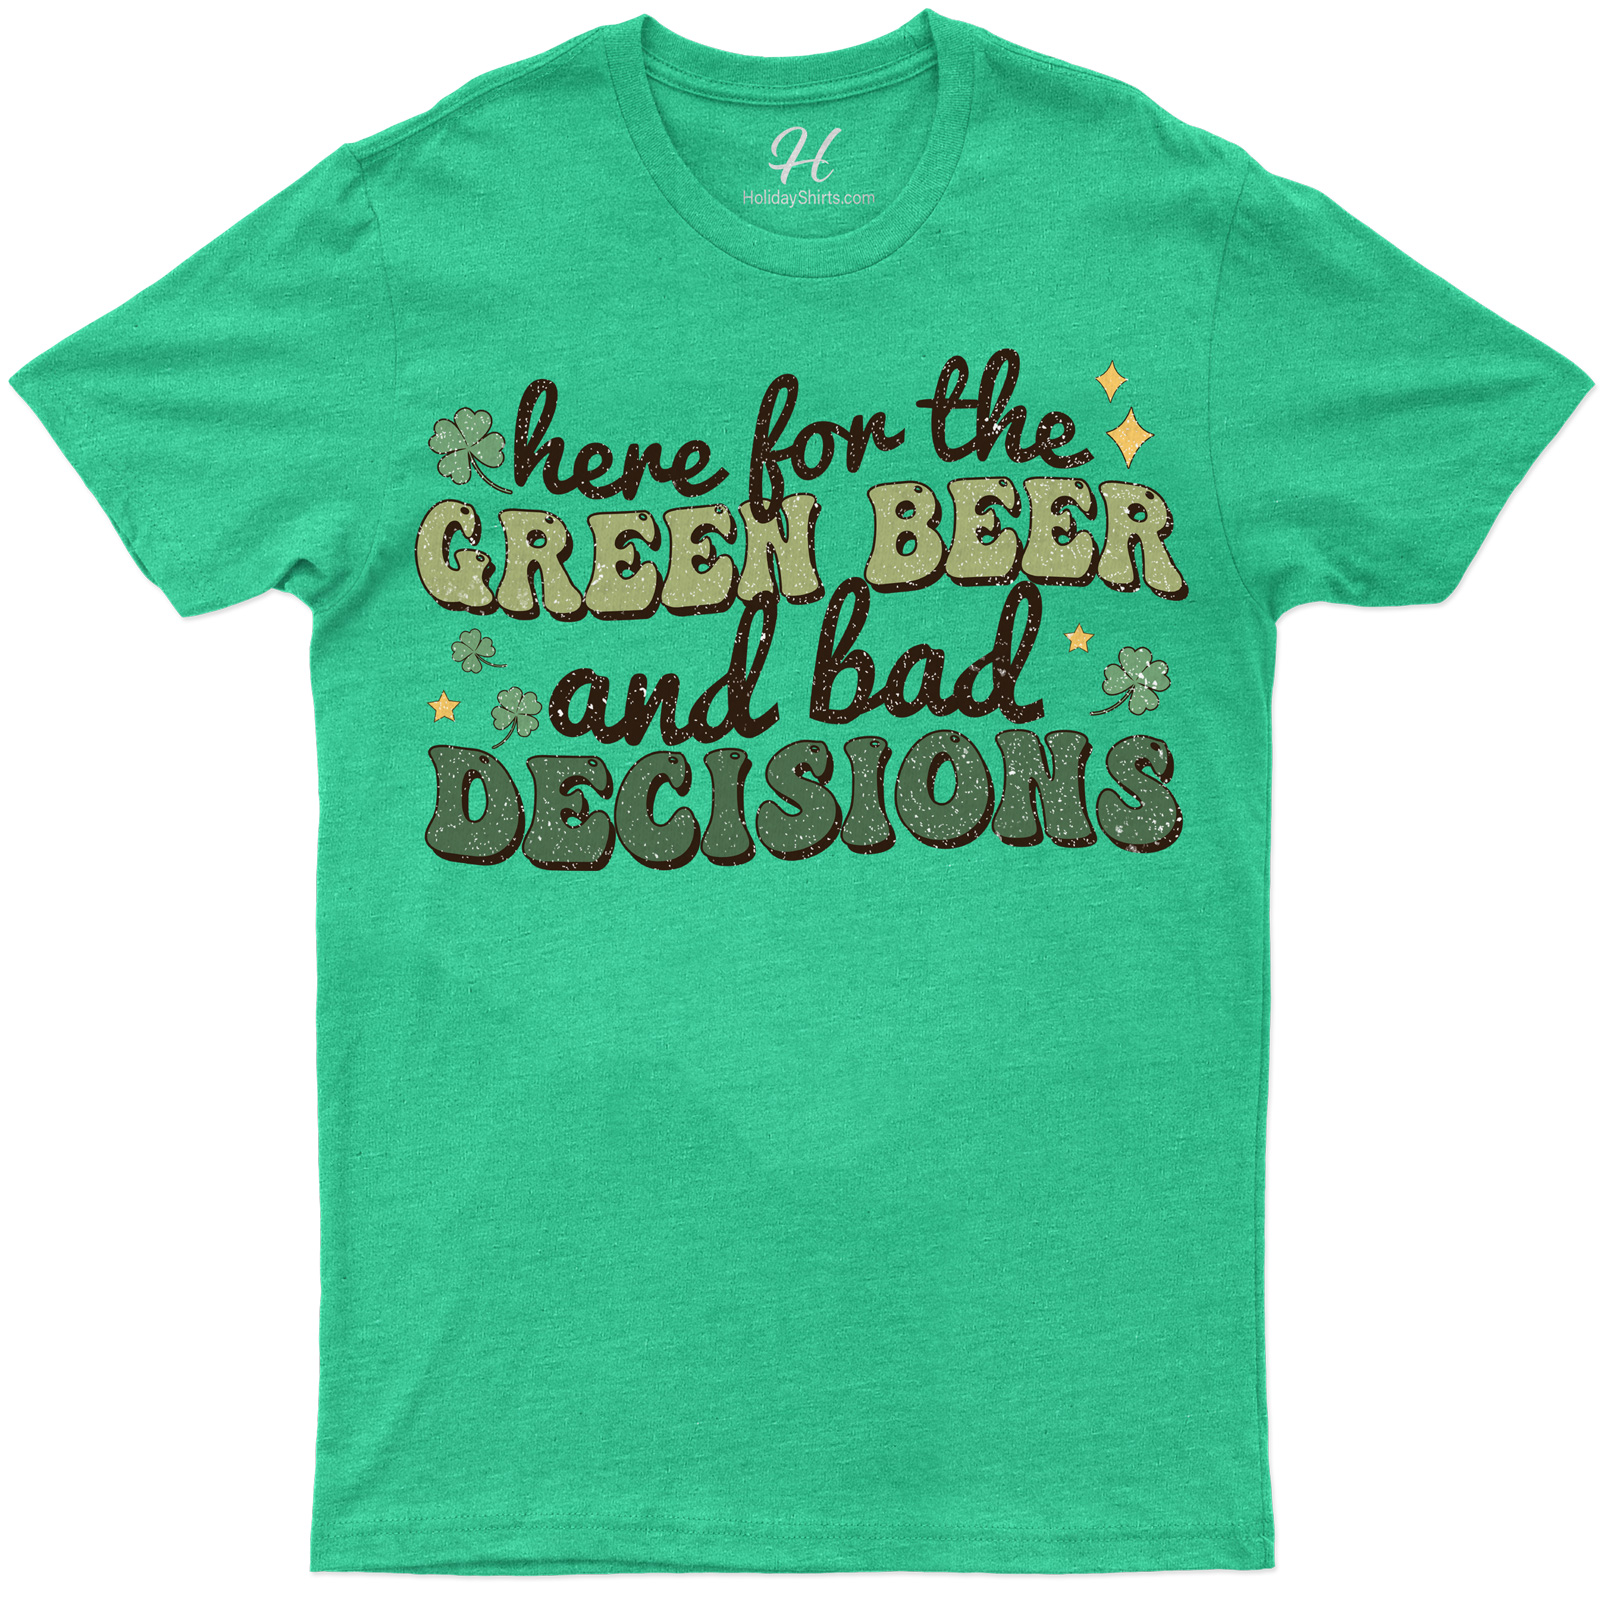 Festive St. Patrick's Day Tee With Humorous Slogan And Clover Accents